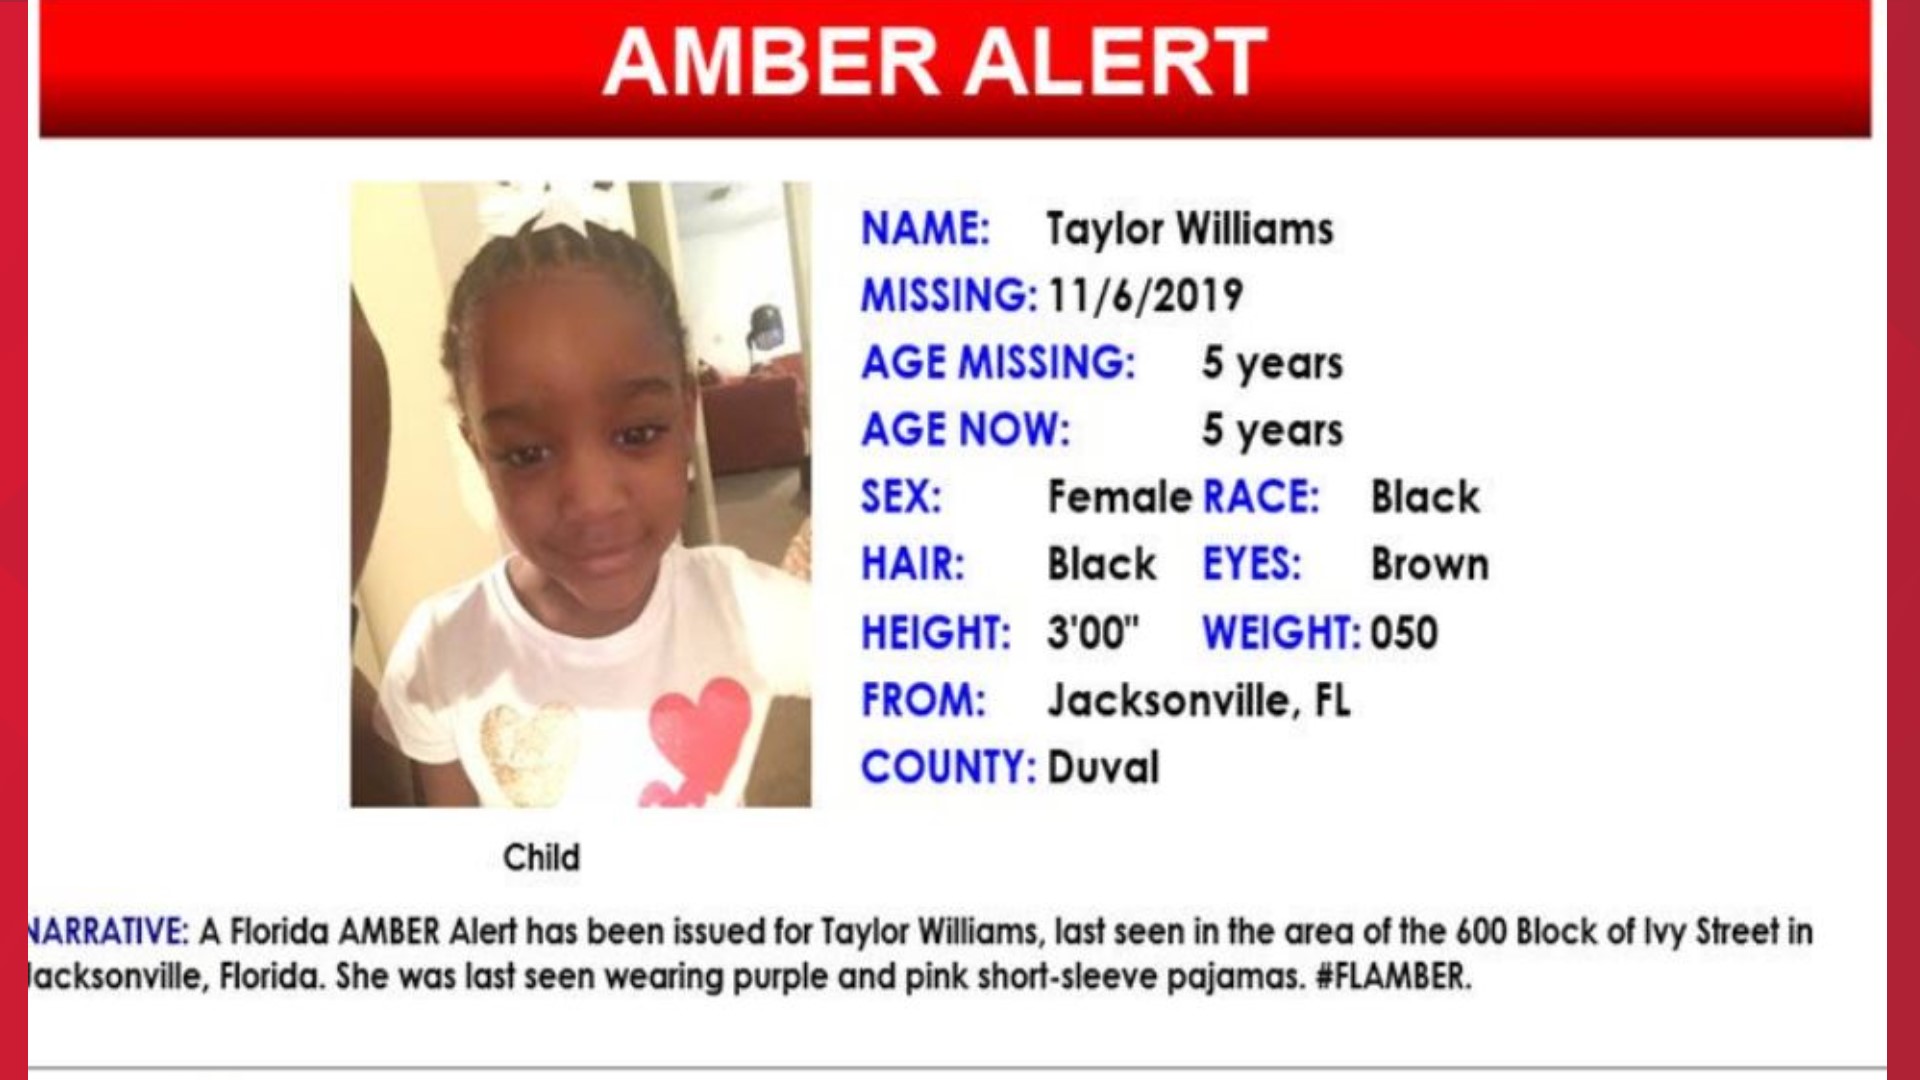 The Jacksonville Sheriff's Office gave information about Taylor Rose Williams who was last seen in her home around midnight.